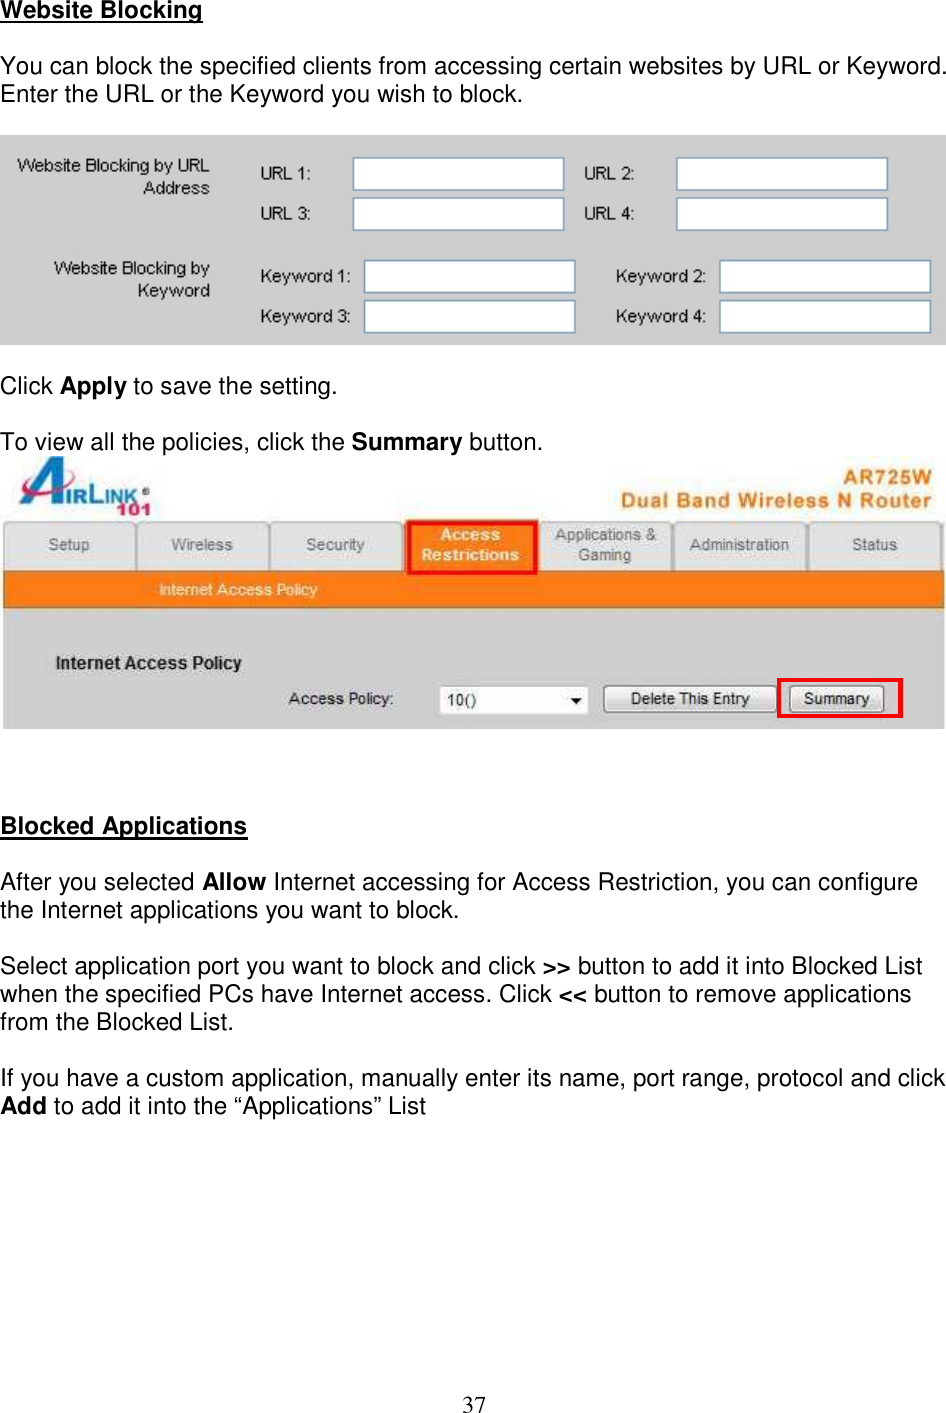 37 Website Blocking  You can block the specified clients from accessing certain websites by URL or Keyword. Enter the URL or the Keyword you wish to block.    Click Apply to save the setting.  To view all the policies, click the Summary button.     Blocked Applications   After you selected Allow Internet accessing for Access Restriction, you can configure the Internet applications you want to block.  Select application port you want to block and click &gt;&gt; button to add it into Blocked List when the specified PCs have Internet access. Click &lt;&lt; button to remove applications from the Blocked List.  If you have a custom application, manually enter its name, port range, protocol and click Add to add it into the “Applications” List  